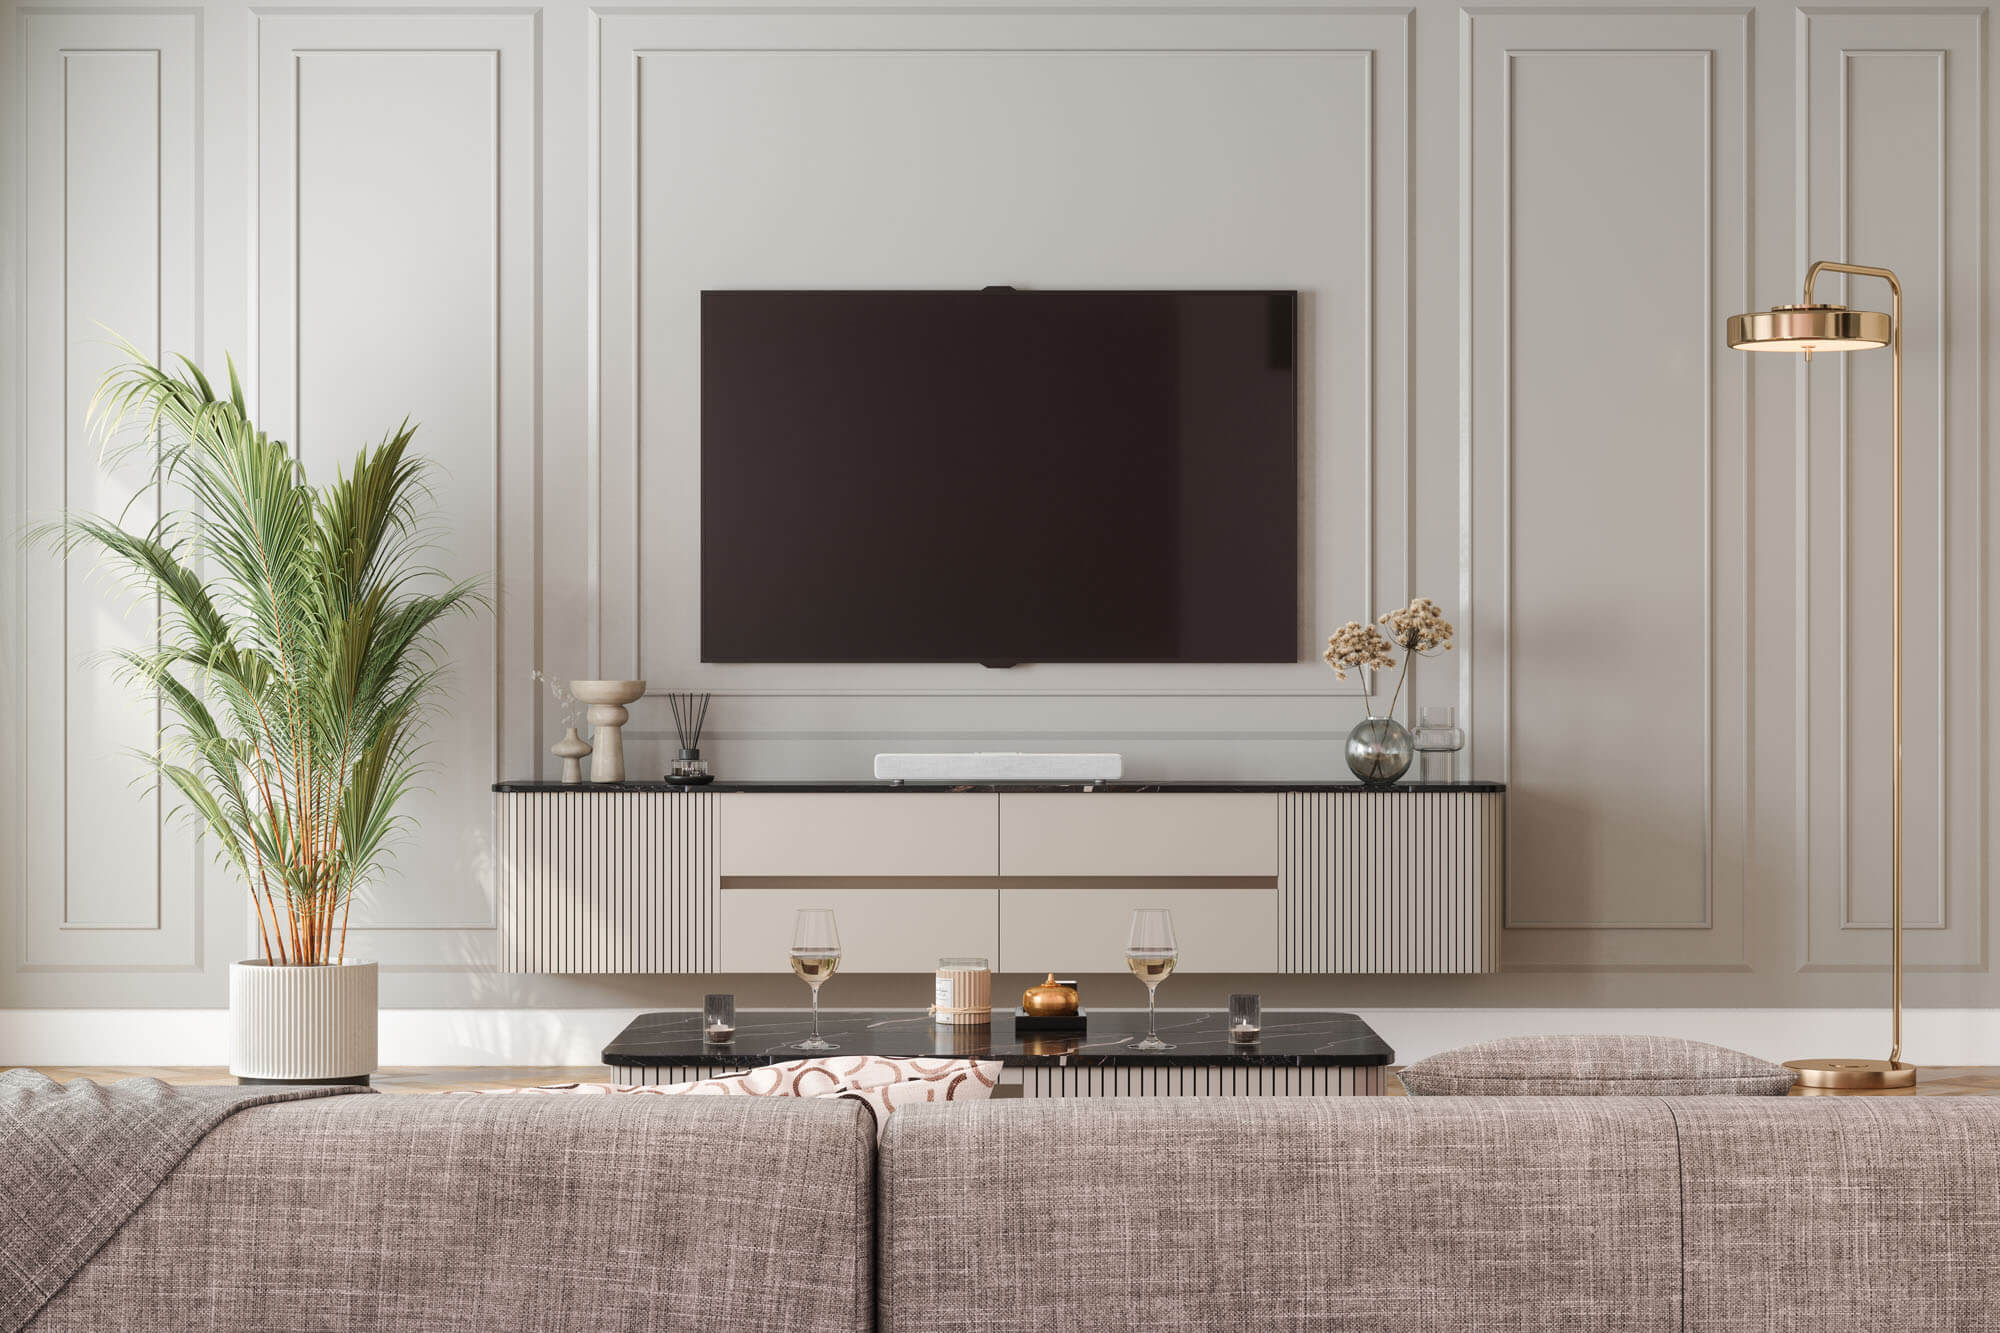 A large flat screen TV mounted on the wall in a living room.